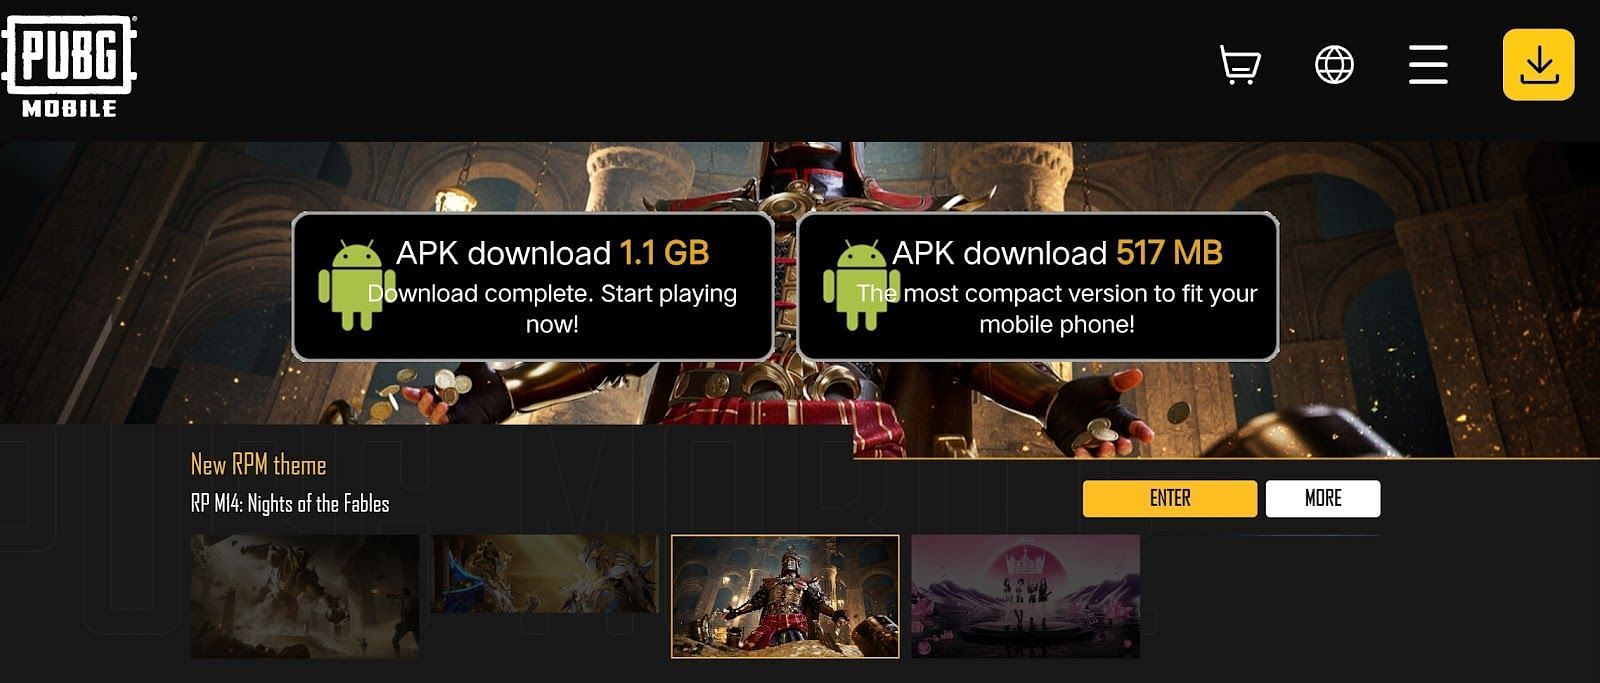 APK download links on the official website of the battle royale game (Image via Krafton/Tencent Games)